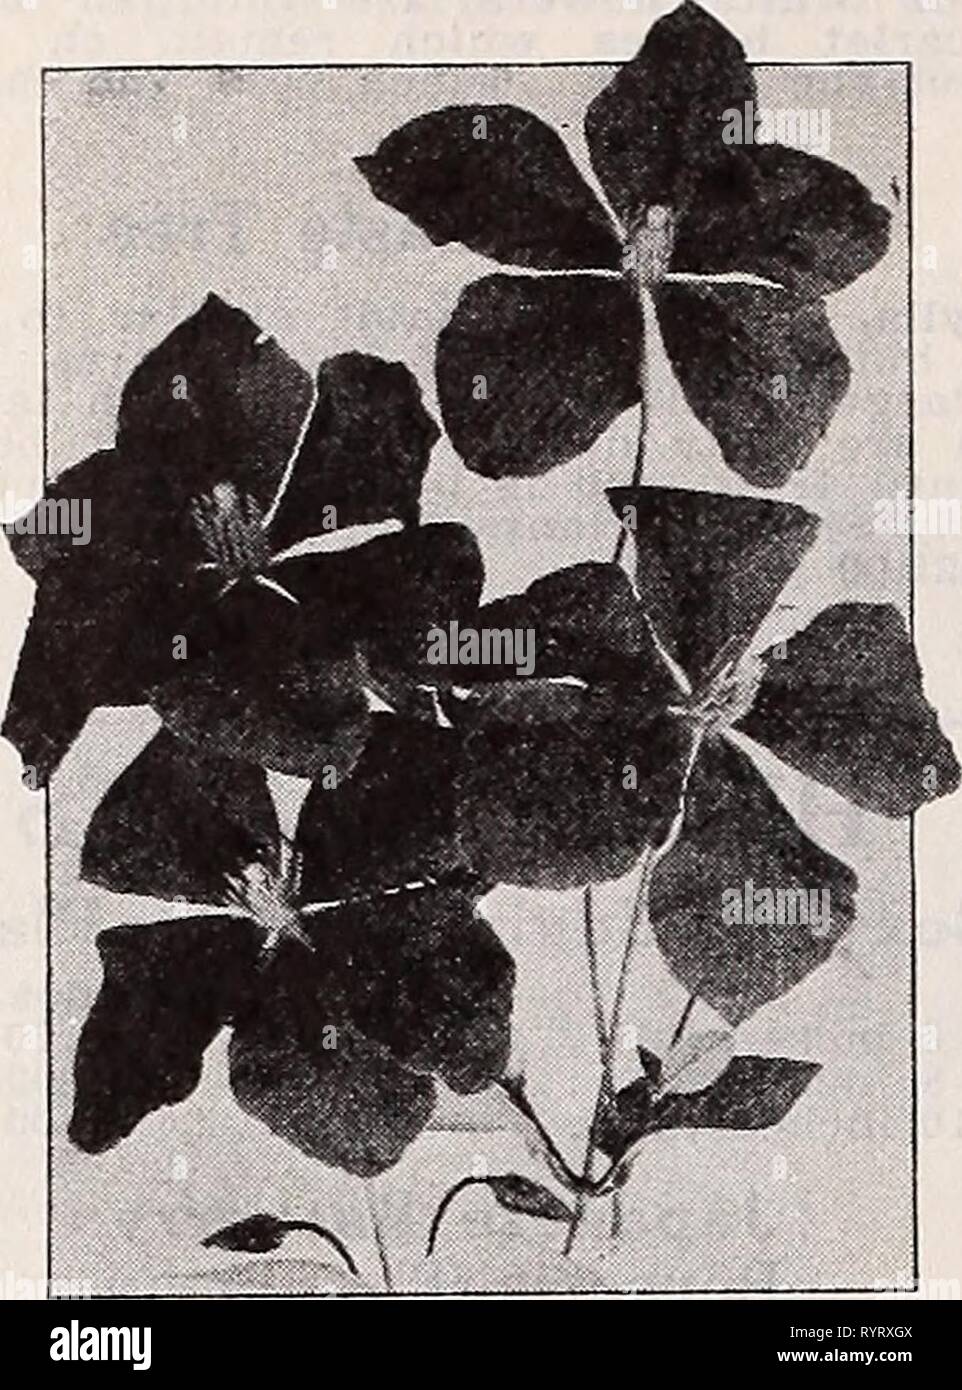 Dreer's wholesale catalog for florists Dreer's wholesale catalog for florists and market gardeners : 1939 winter spring summer . dreerswholesalec1939henr Year: 1939  henry a. dreer Hardy Vines and Climbers wholesale catalog Clematis paniculata Japanese Virgin's Bower Strong two-year-old plants. $3.00 per doz.; $20.00 per 100.    Clematis Jackmani Large Flowering Clematis Duchess of Edinburgh. Double white. Henryi, Large single creamy white. Jackmani. Rich purple. Mine. Edouard Andre. Carmine. Two-year-old plants: GOc each. Euonymus Per doz. Per 100 Kadicans acutus coloratus. A strong growing v Stock Photo